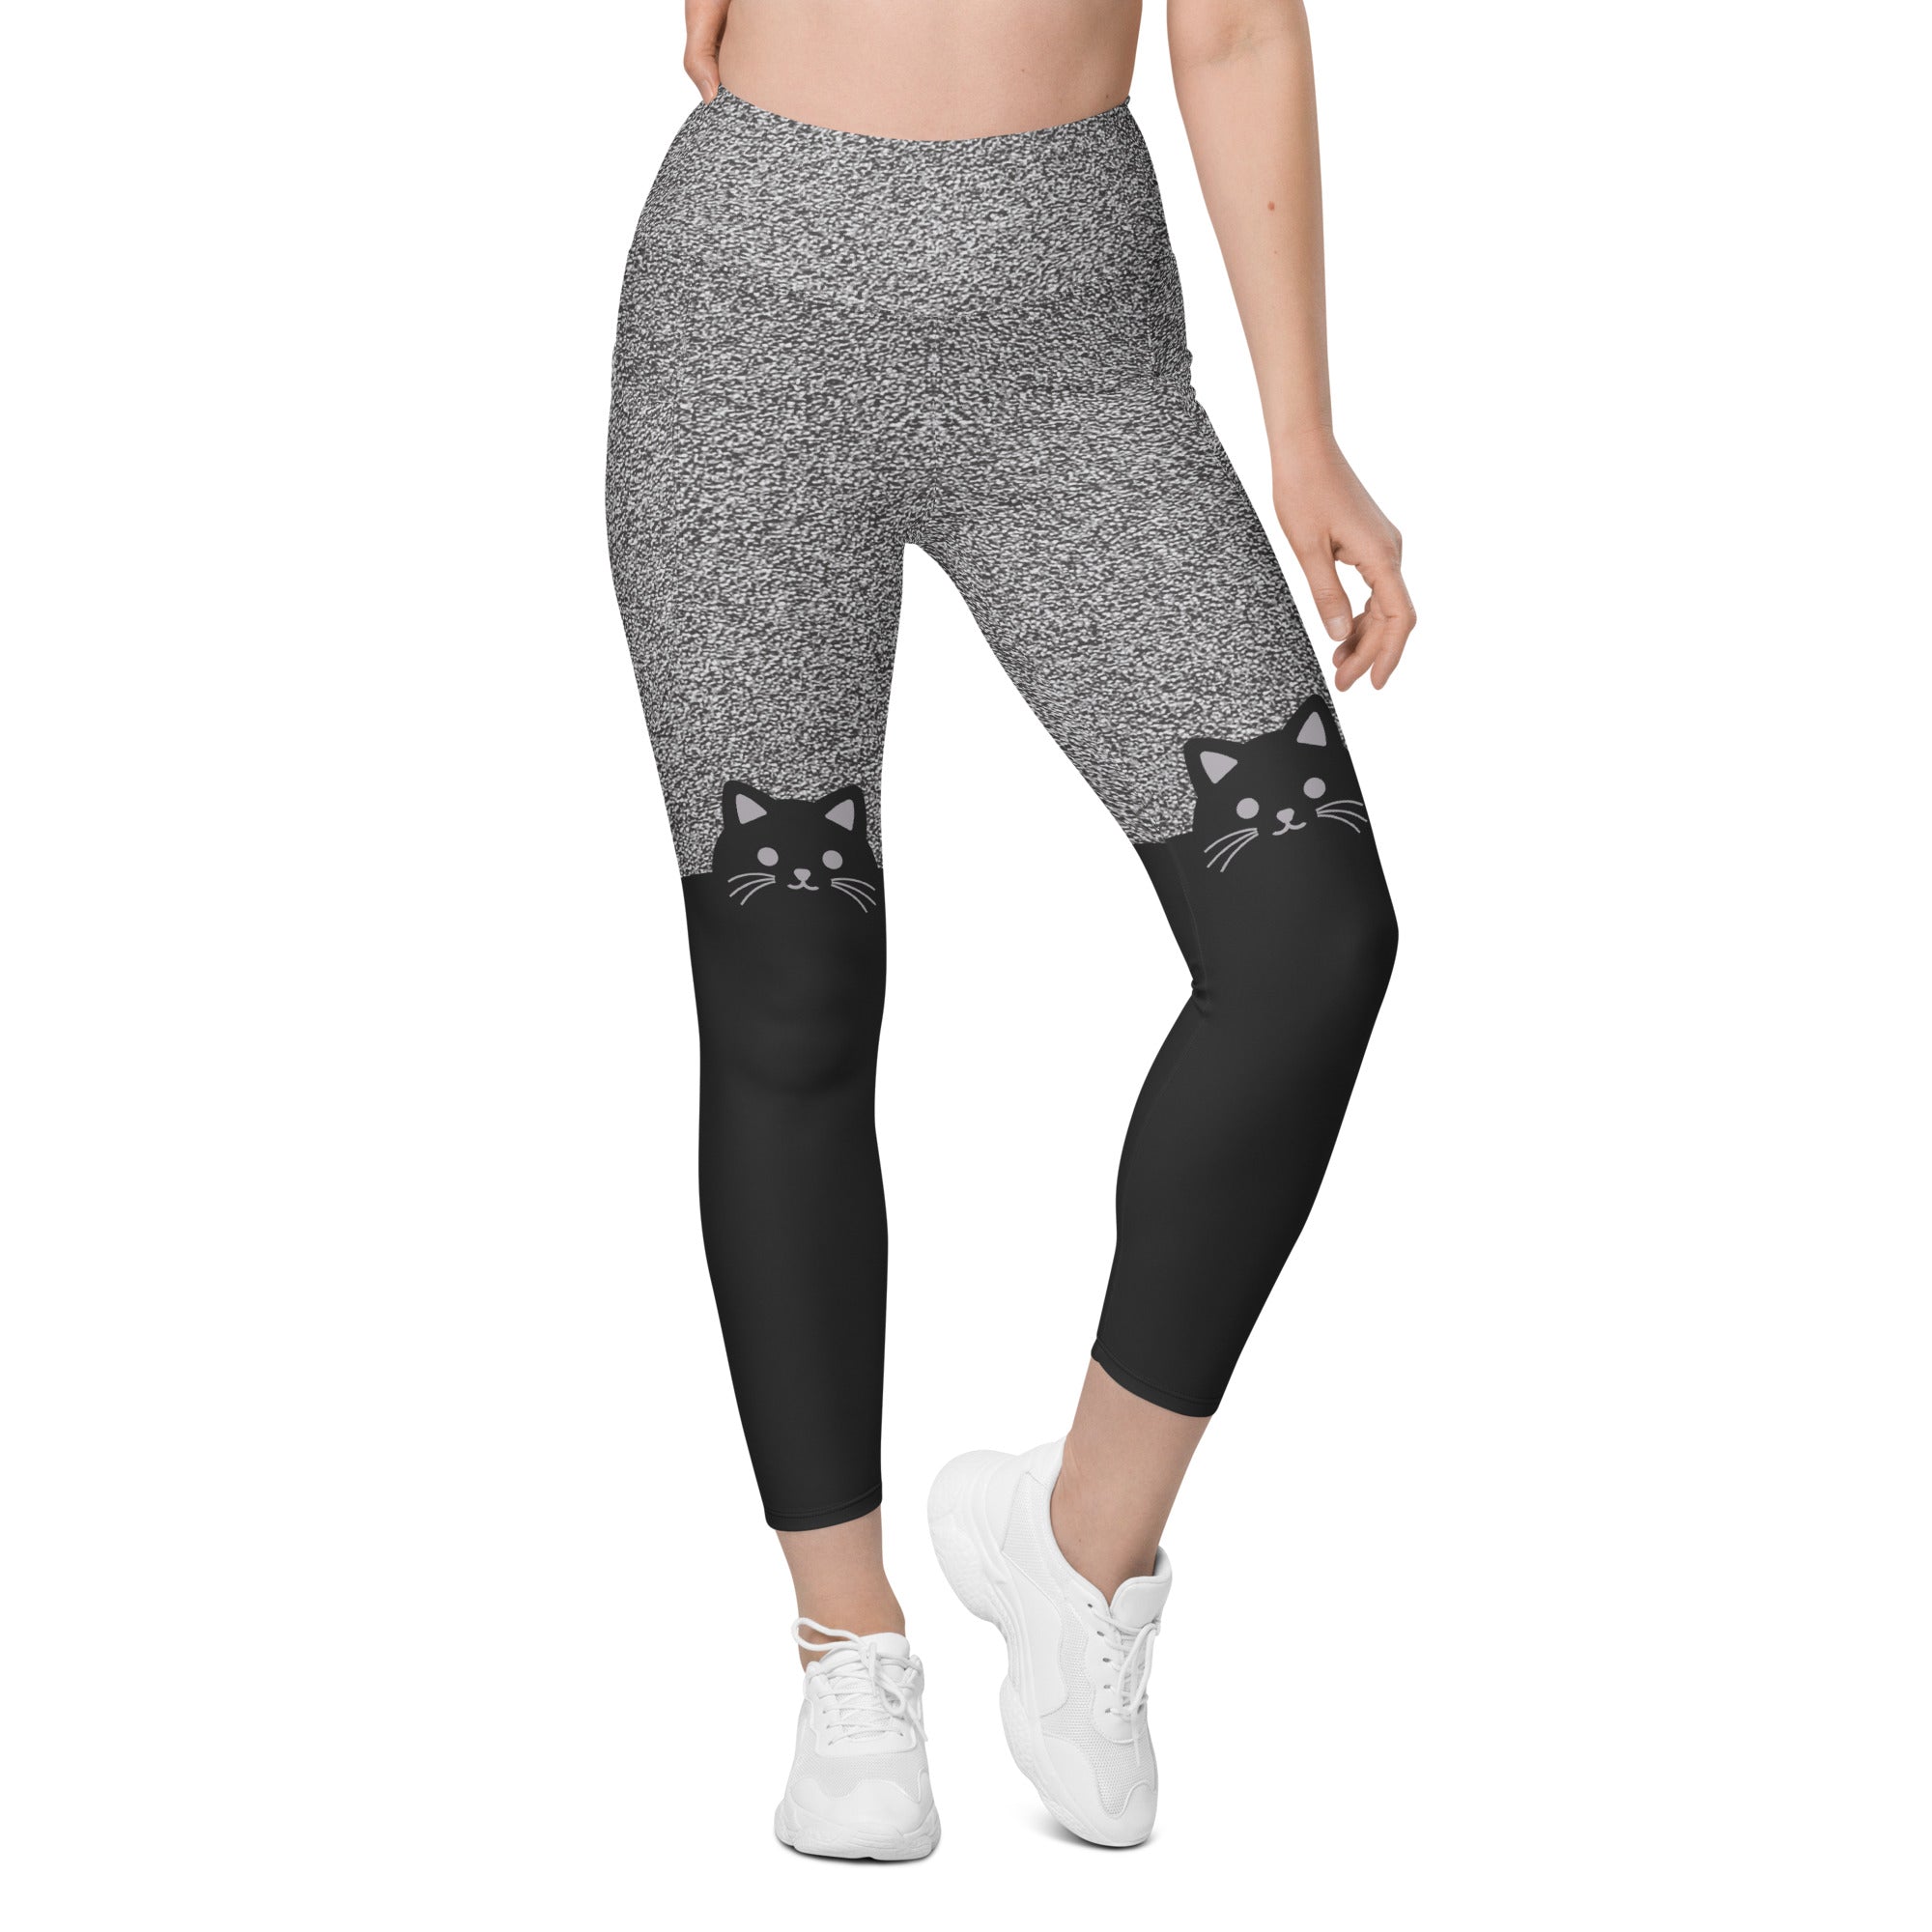 Discover Convenient Leggings with Pockets